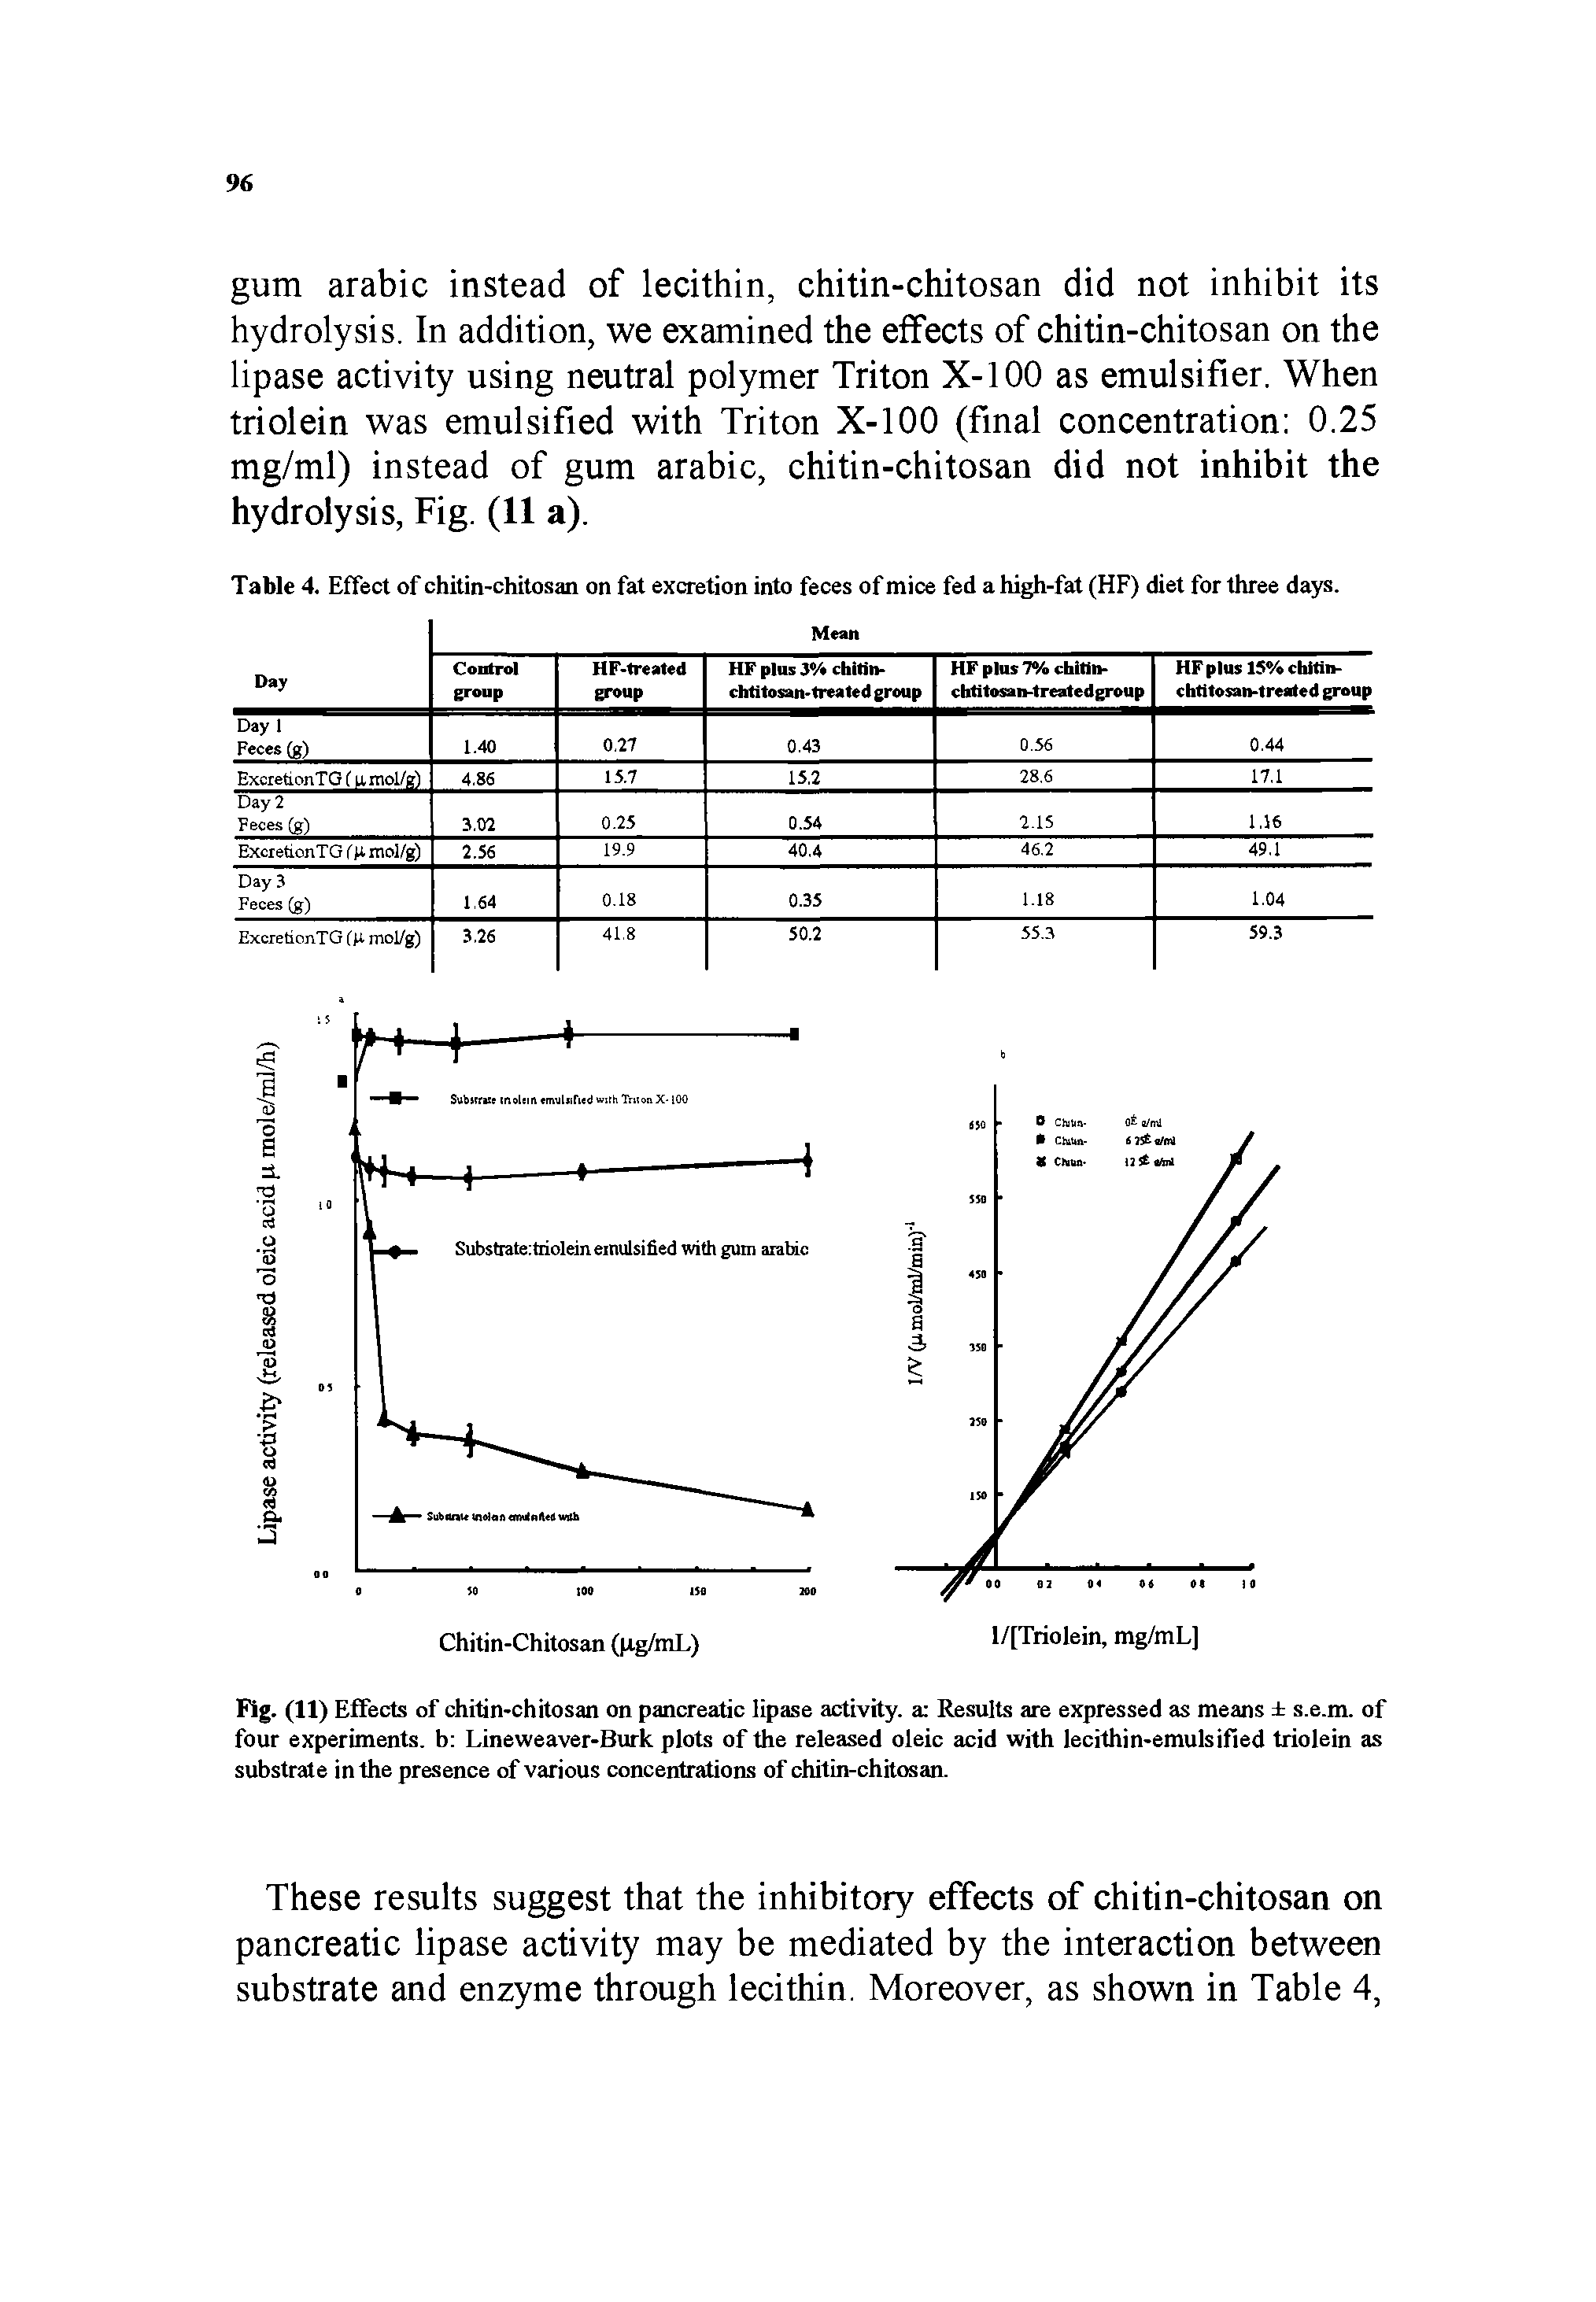 Fig. (11) Effects of chitin-chitosan on pancreatic lipase activity, a Results are expressed as means s.e.m. of four experiments, b Lineweaver-Burk plots of the released oleic acid with lecithin-emulsified triolein as substrate in the presence of various concentrations of chitin-chitosan.